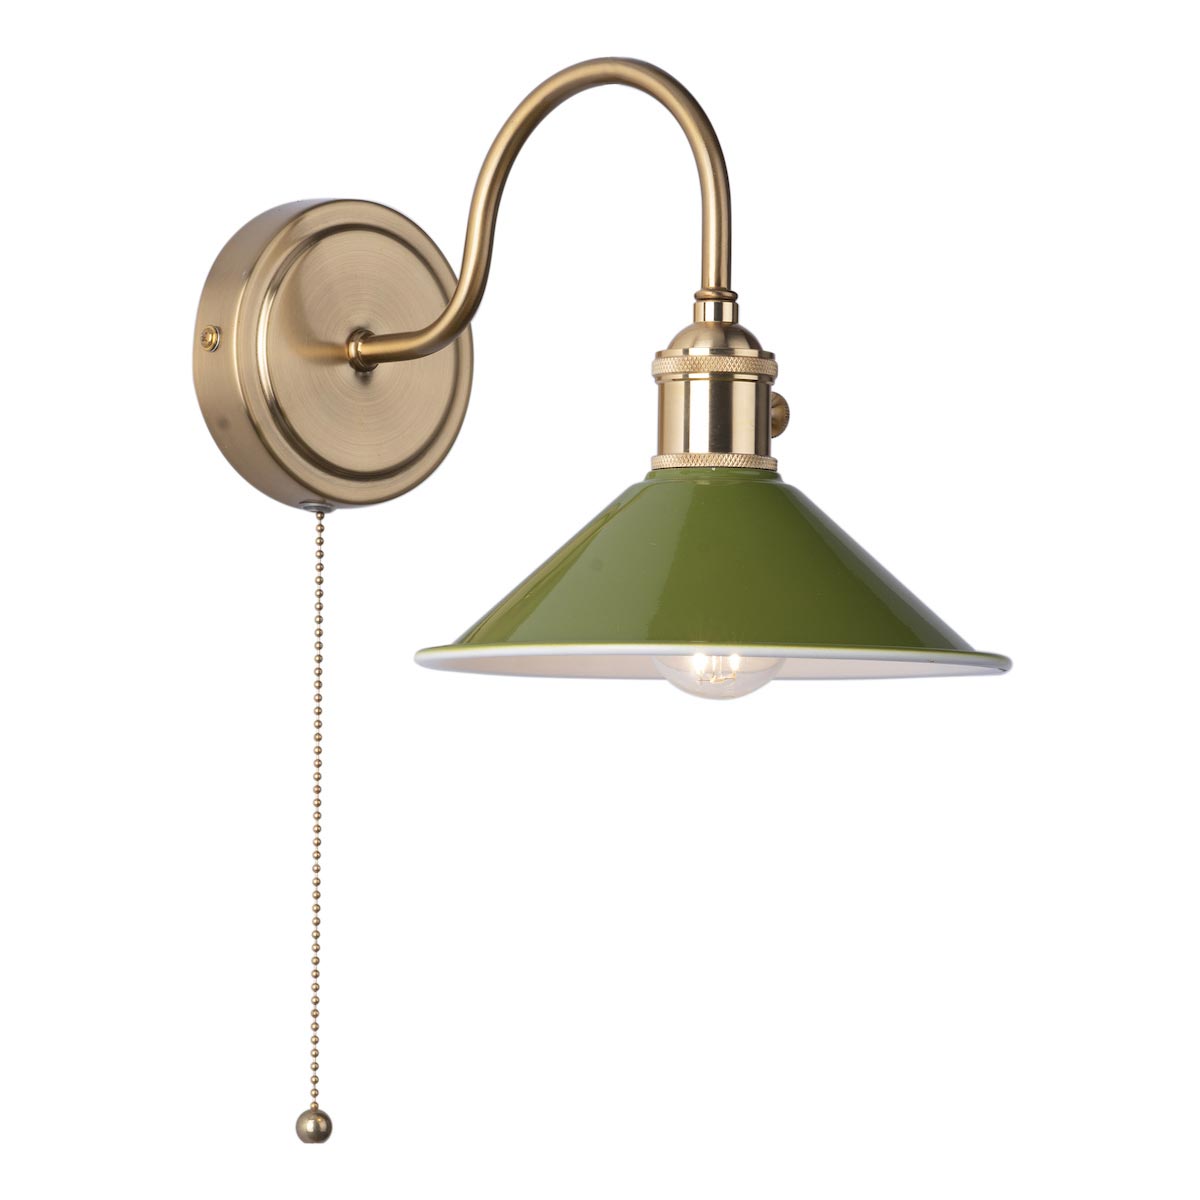 Dar Hadano Switched Single Wall Light Olive Green Shade / Natural Brass